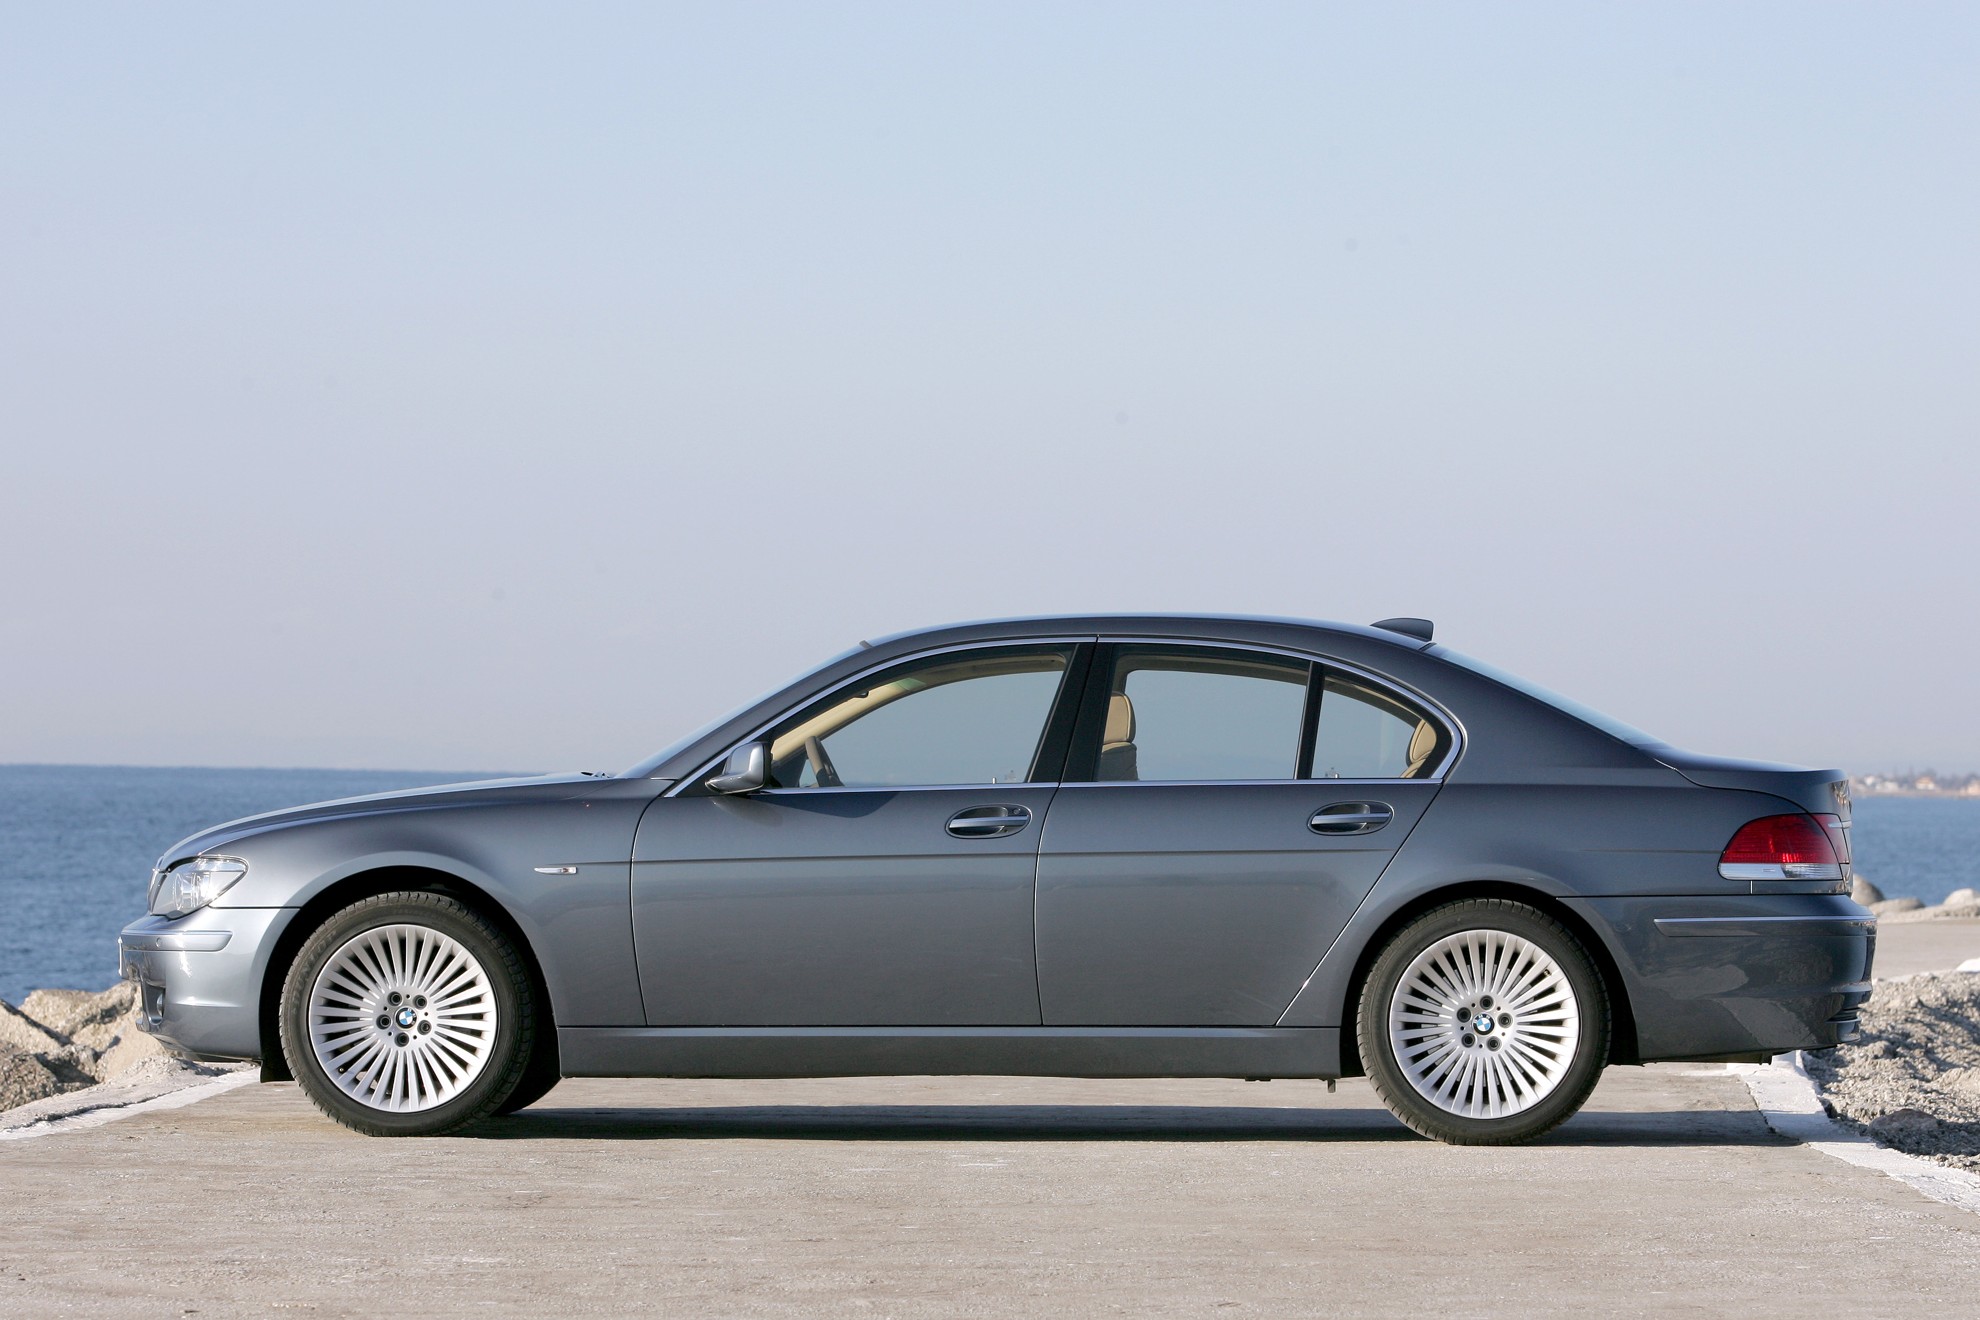 BMW North America offers Fairmont President’s Club Chauffeured Car Service